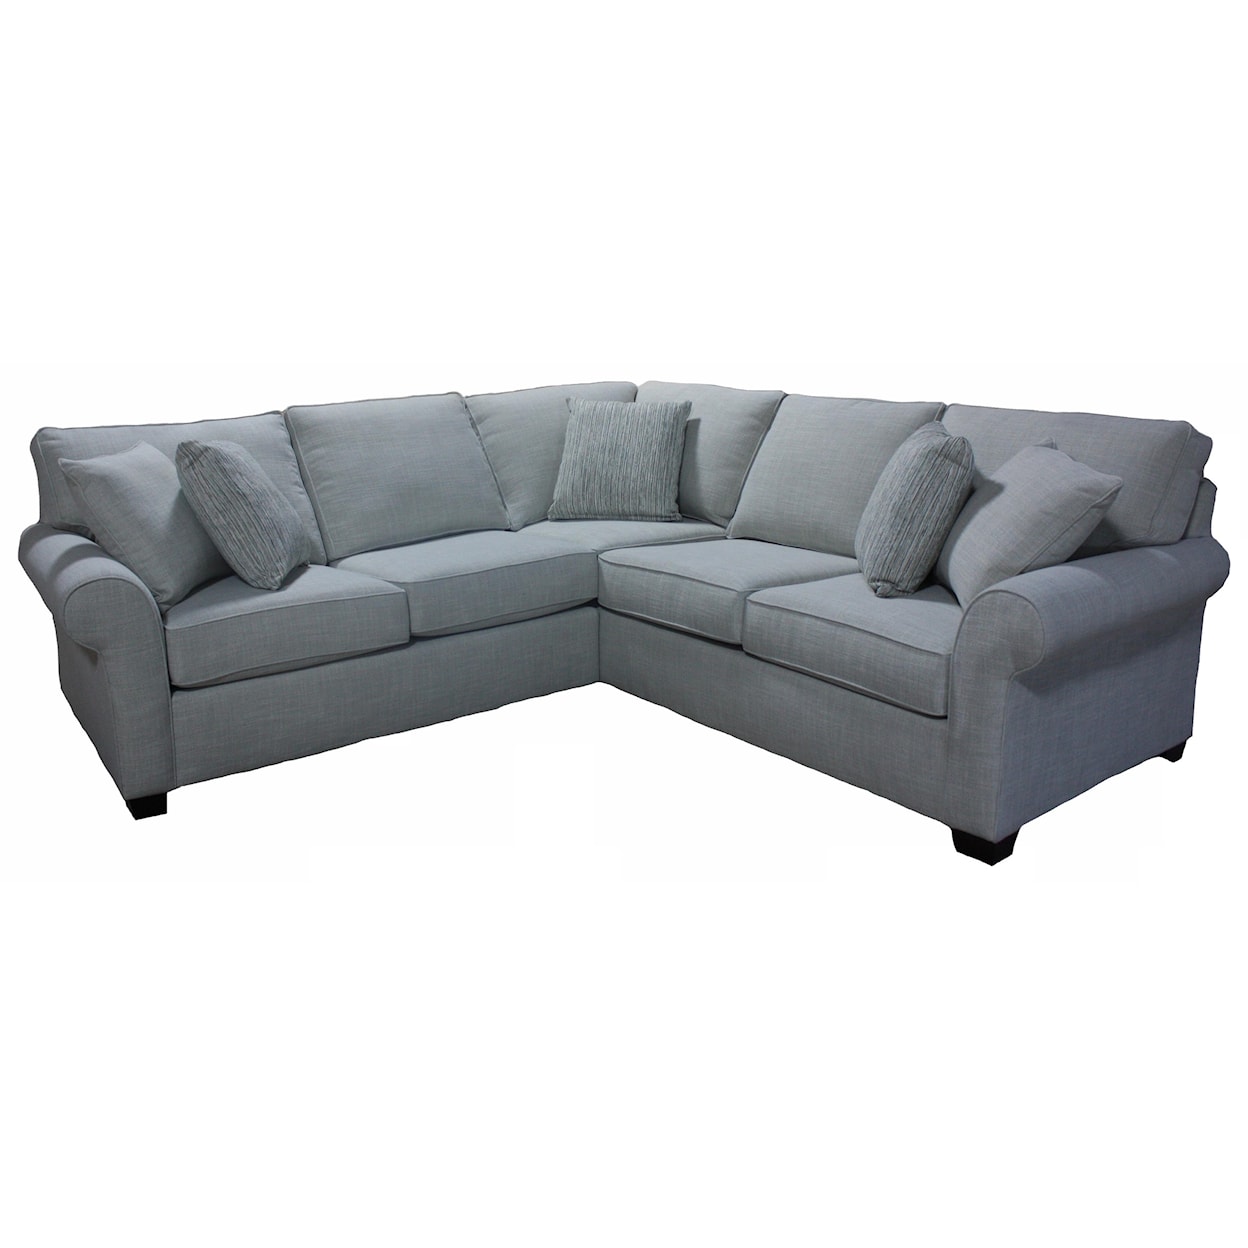 Stone & Leigh Furniture Ethan 2 Piece Sectional